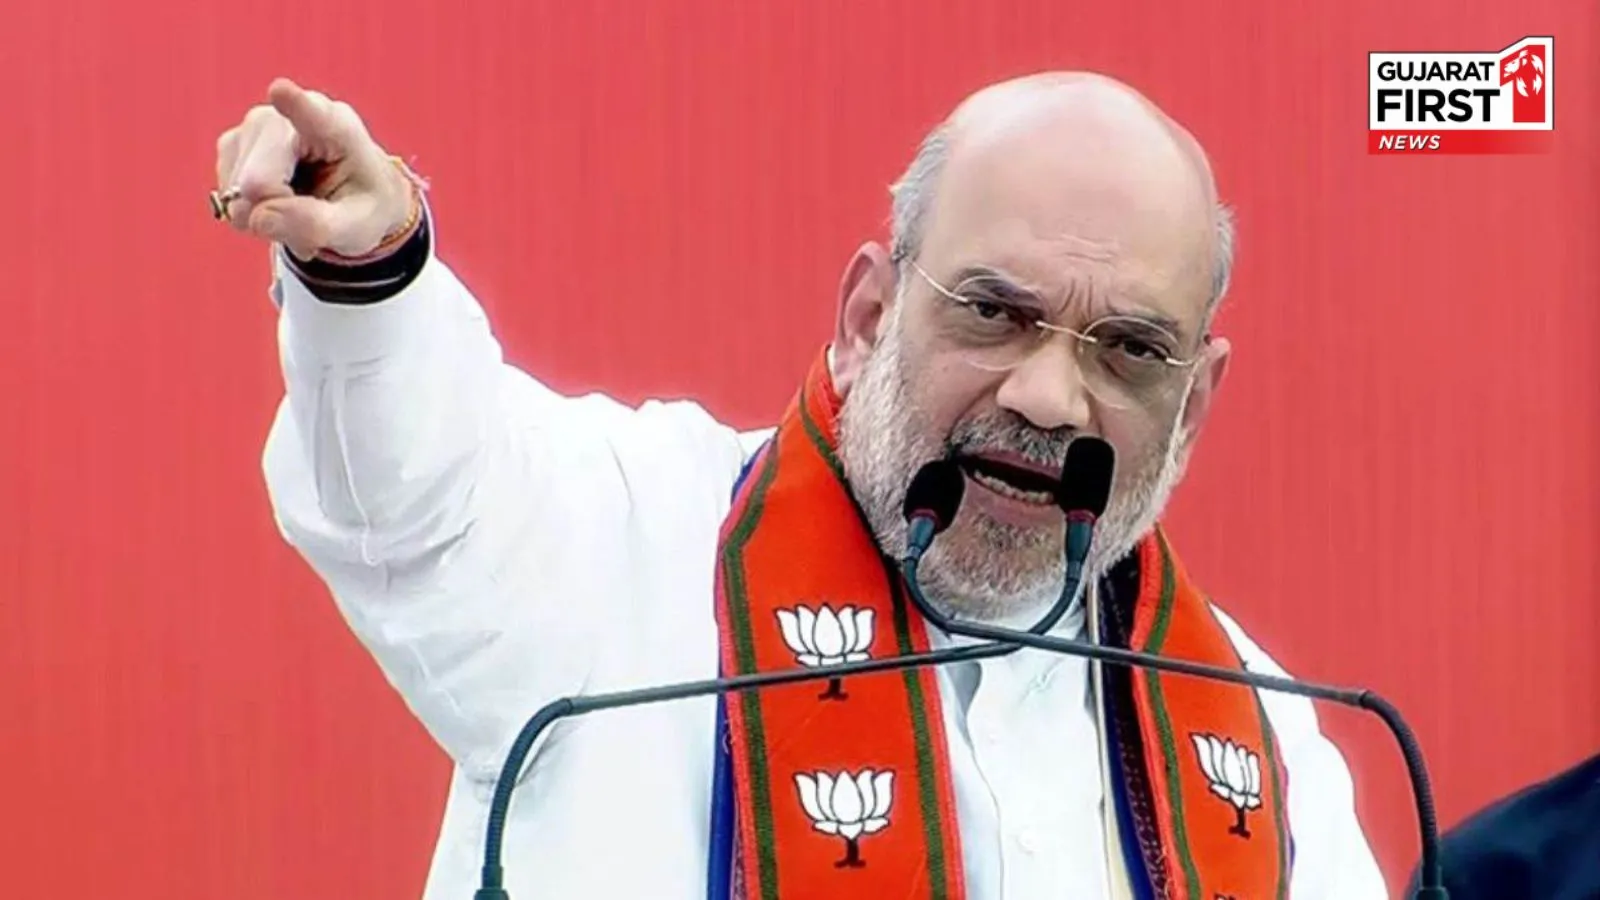 FIR filed on issue of viral edited fake video about reservation of Home Minister Amit Shah